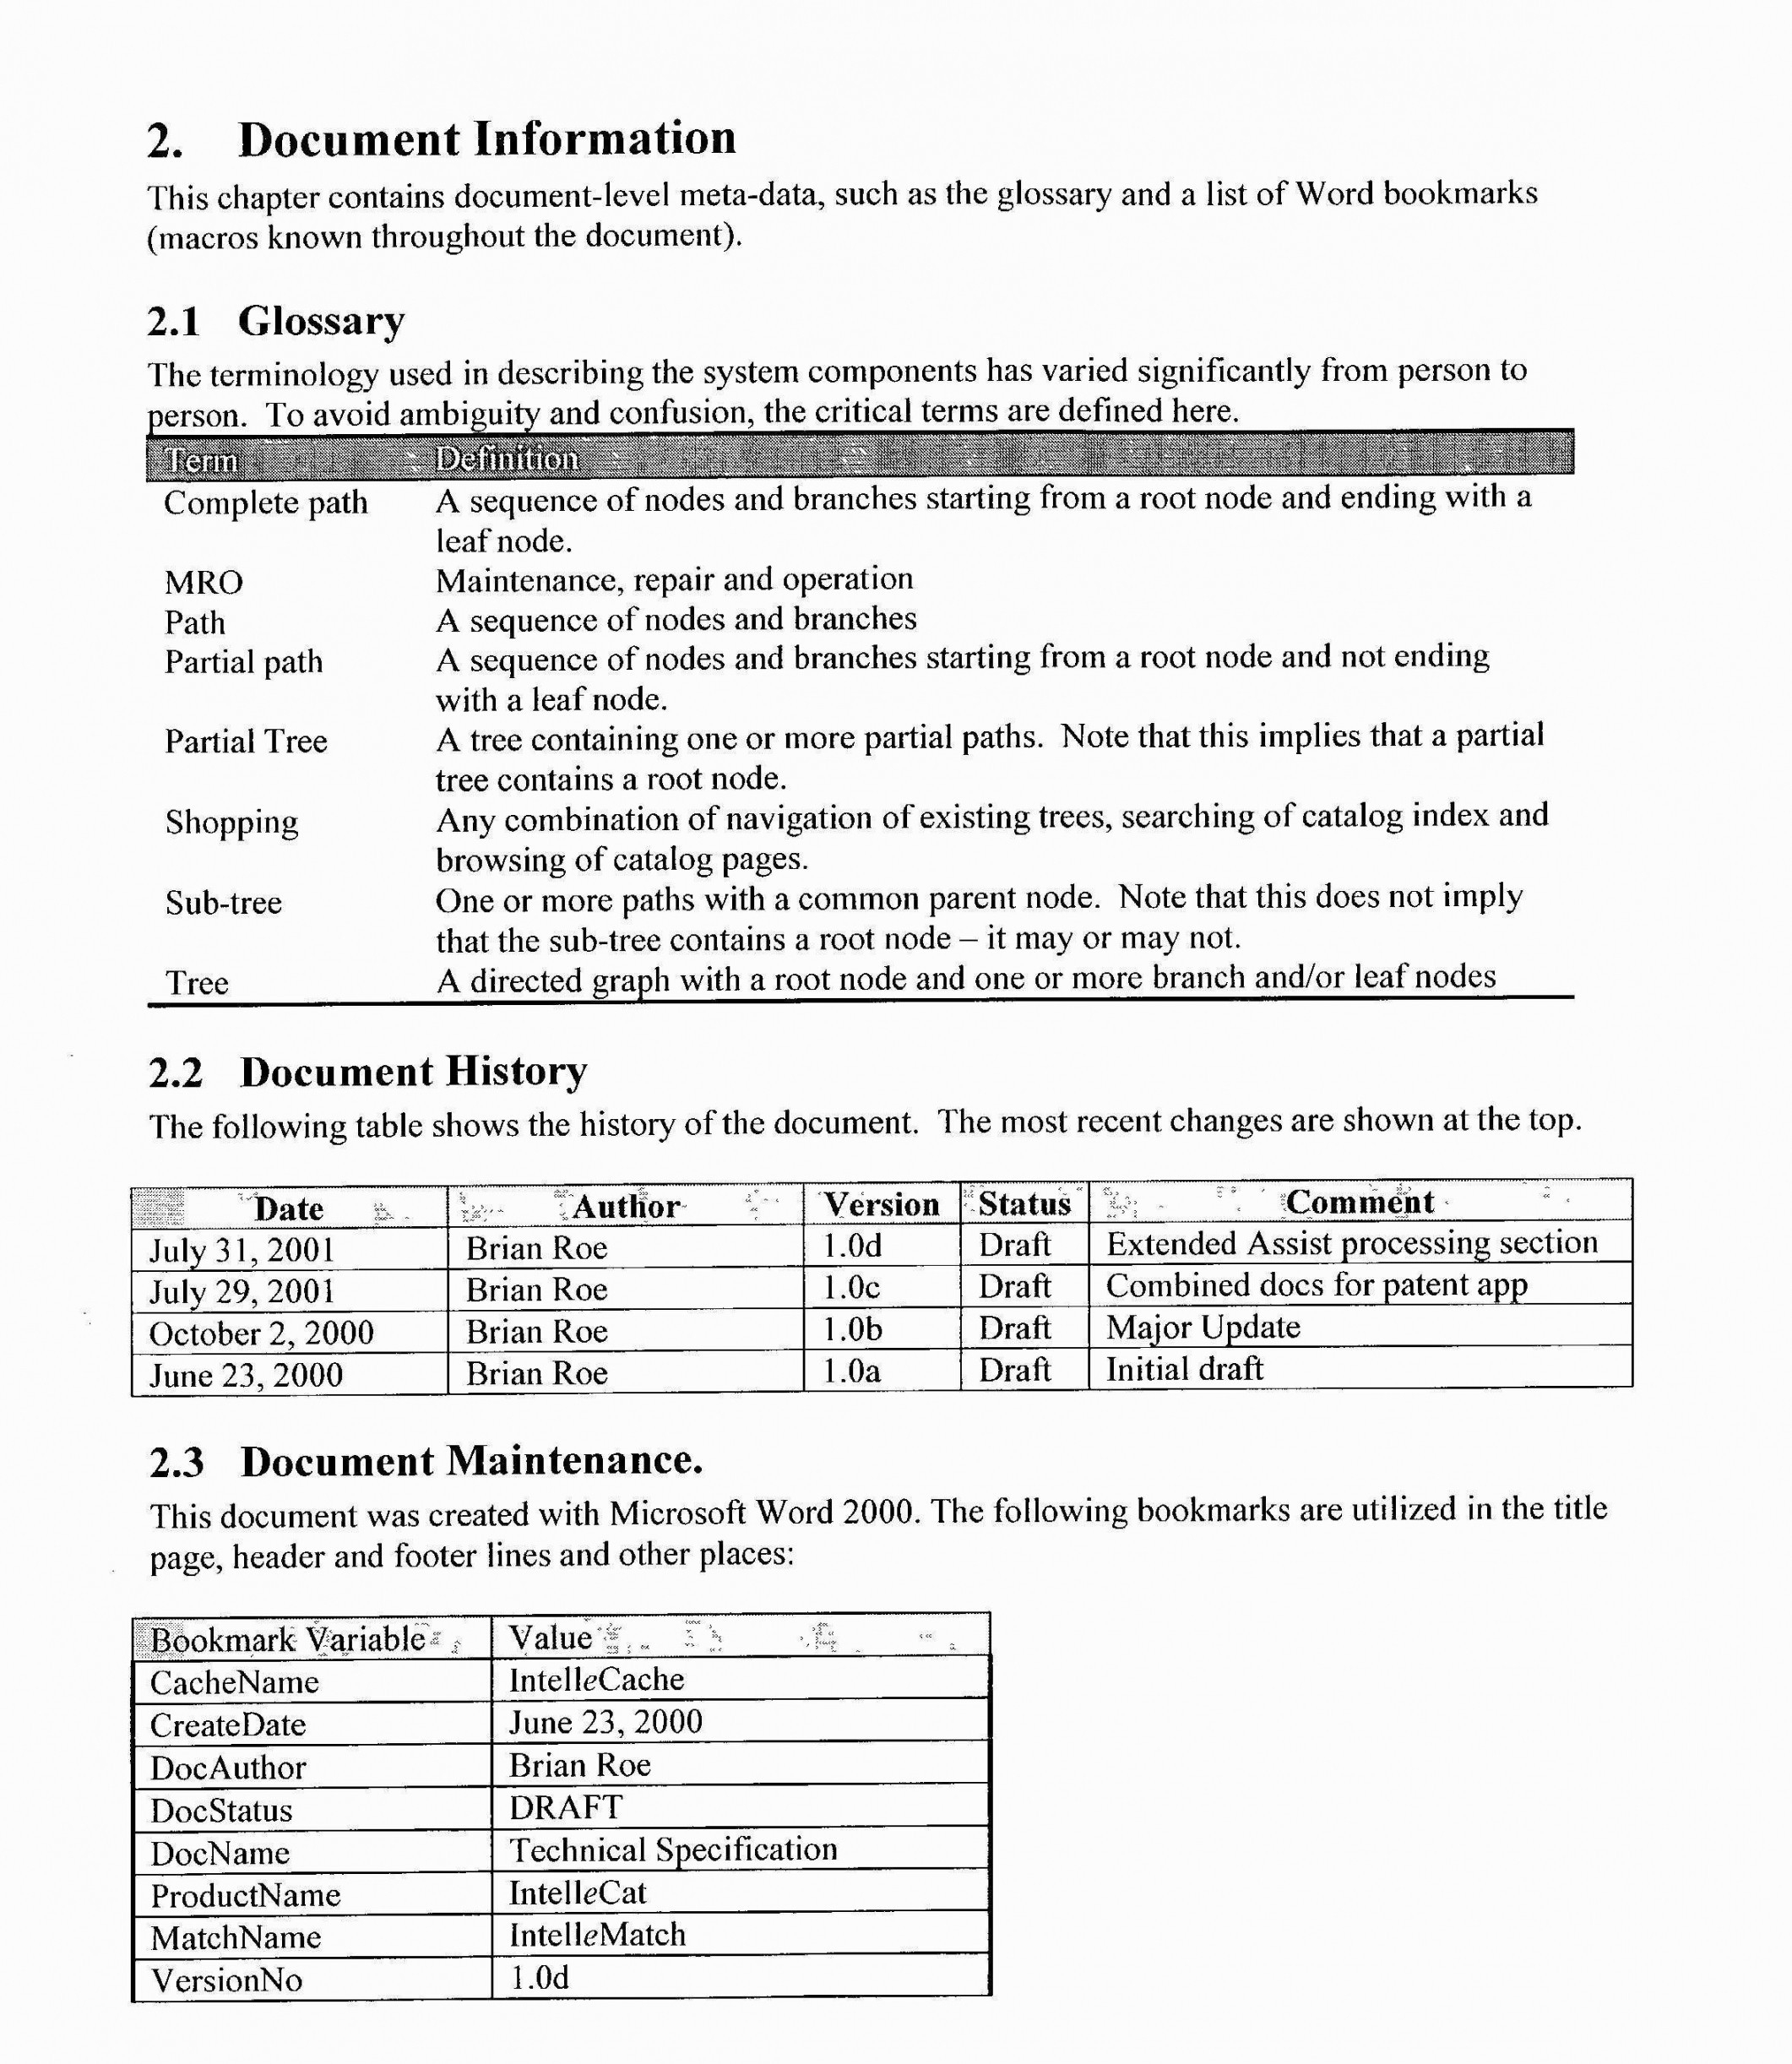 Awesome Stolen Item Report Template - MODELS FORM IDEAS For Credit Risk Analysis Report Template For Credit Risk Analysis Report Template